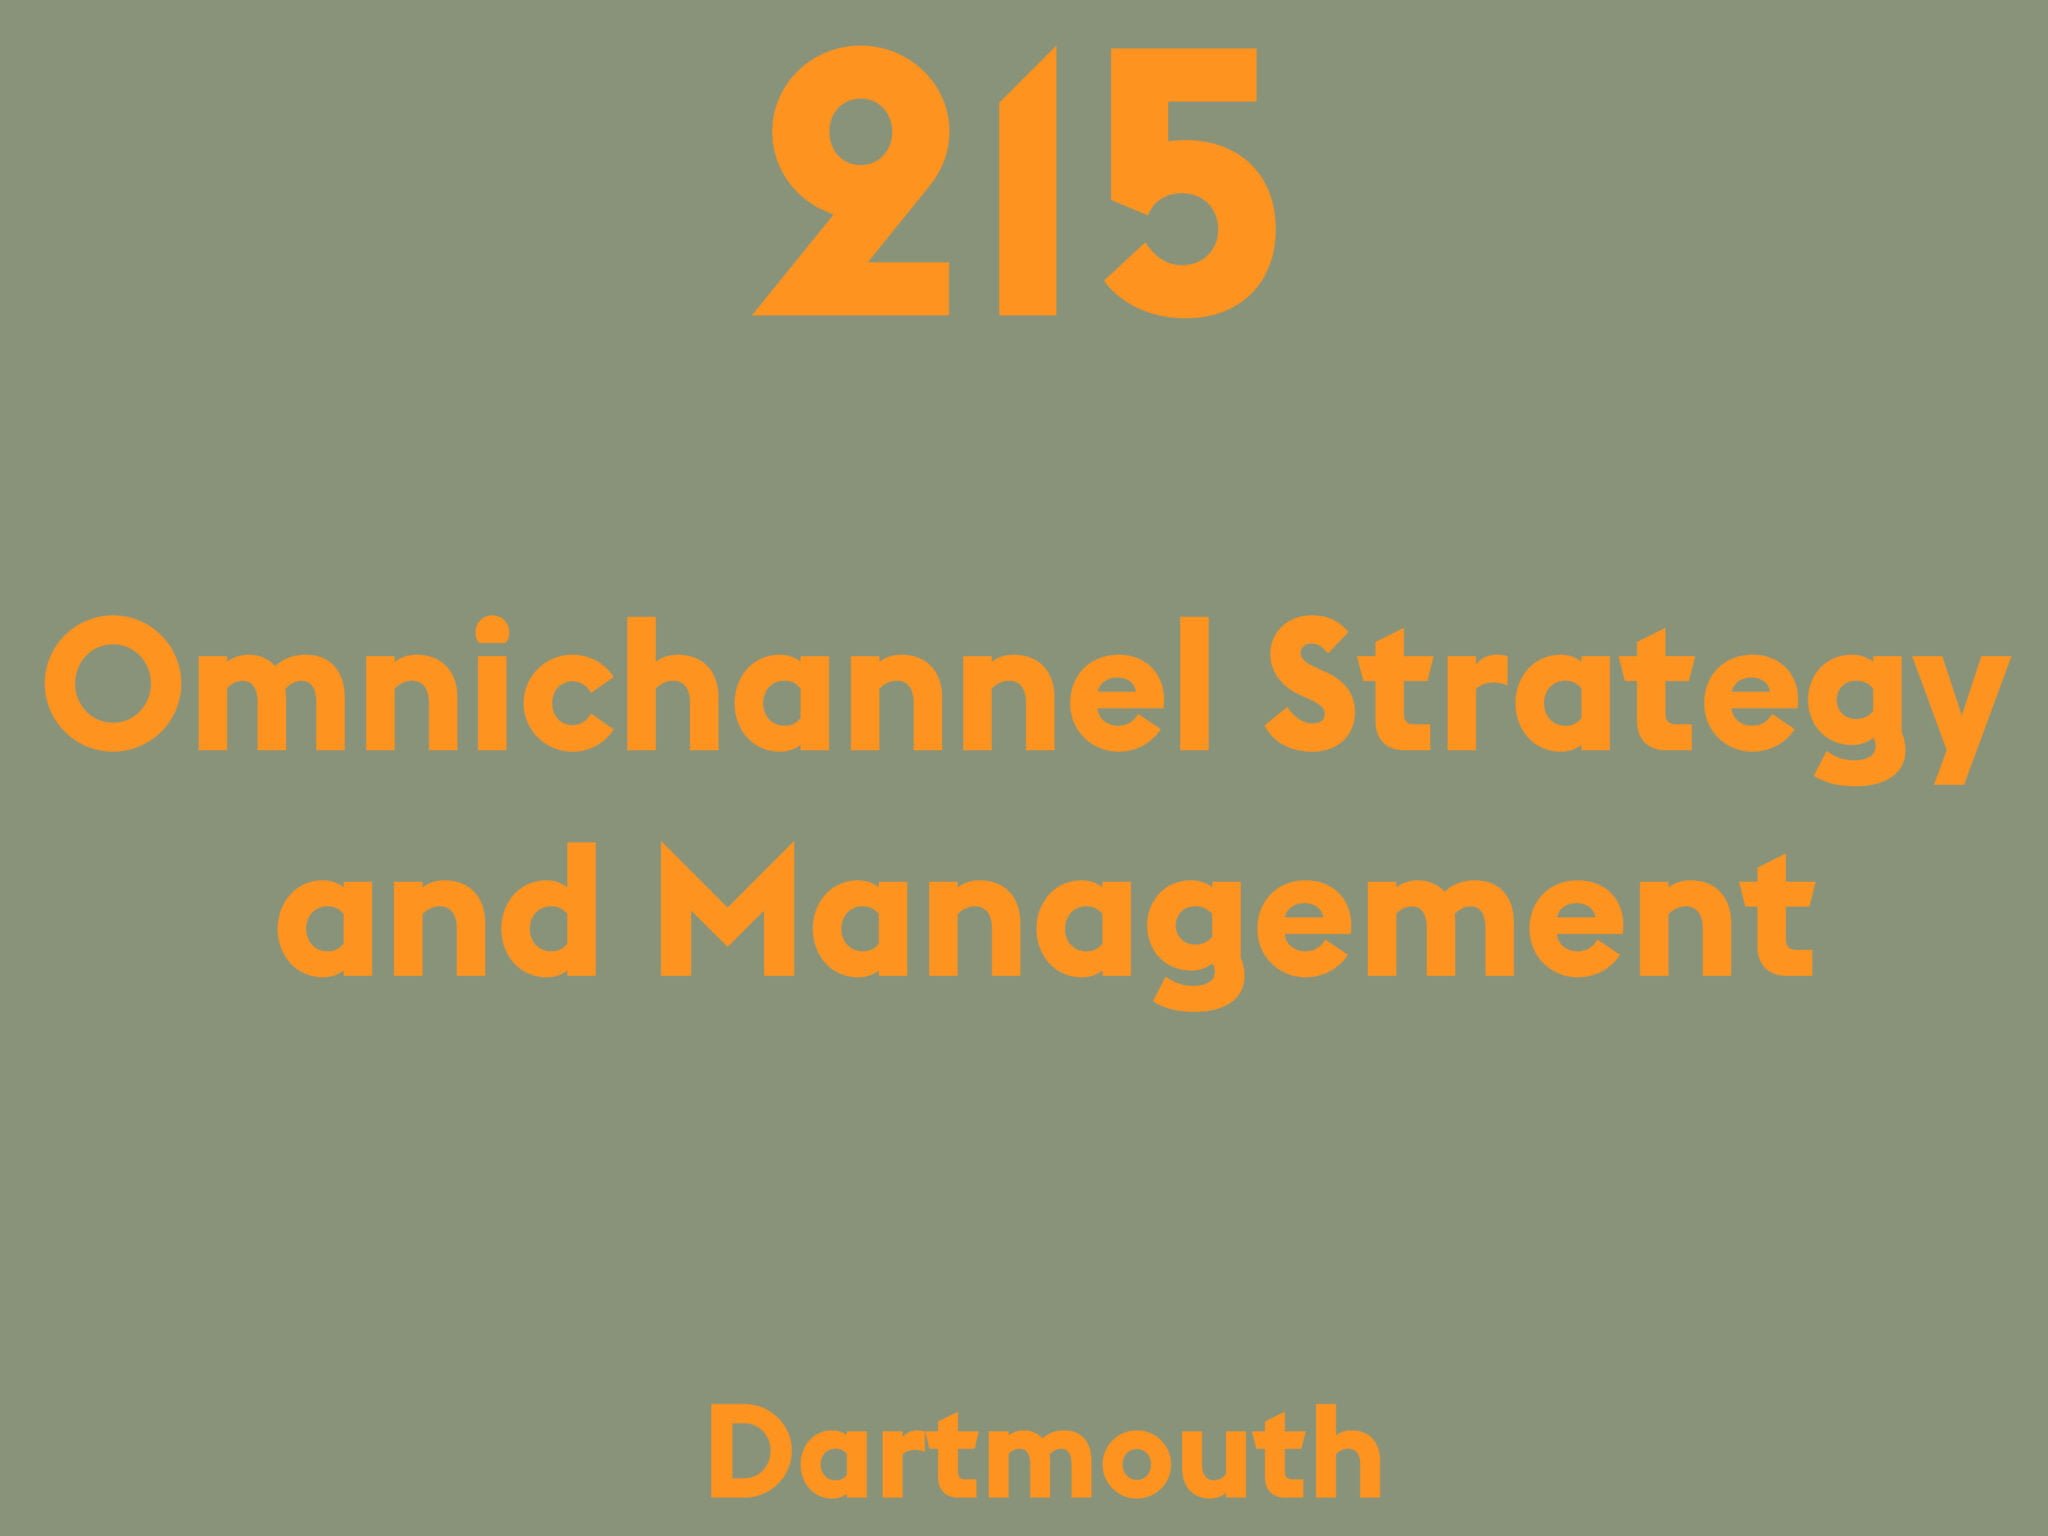 Omnichannel Strategy and Management